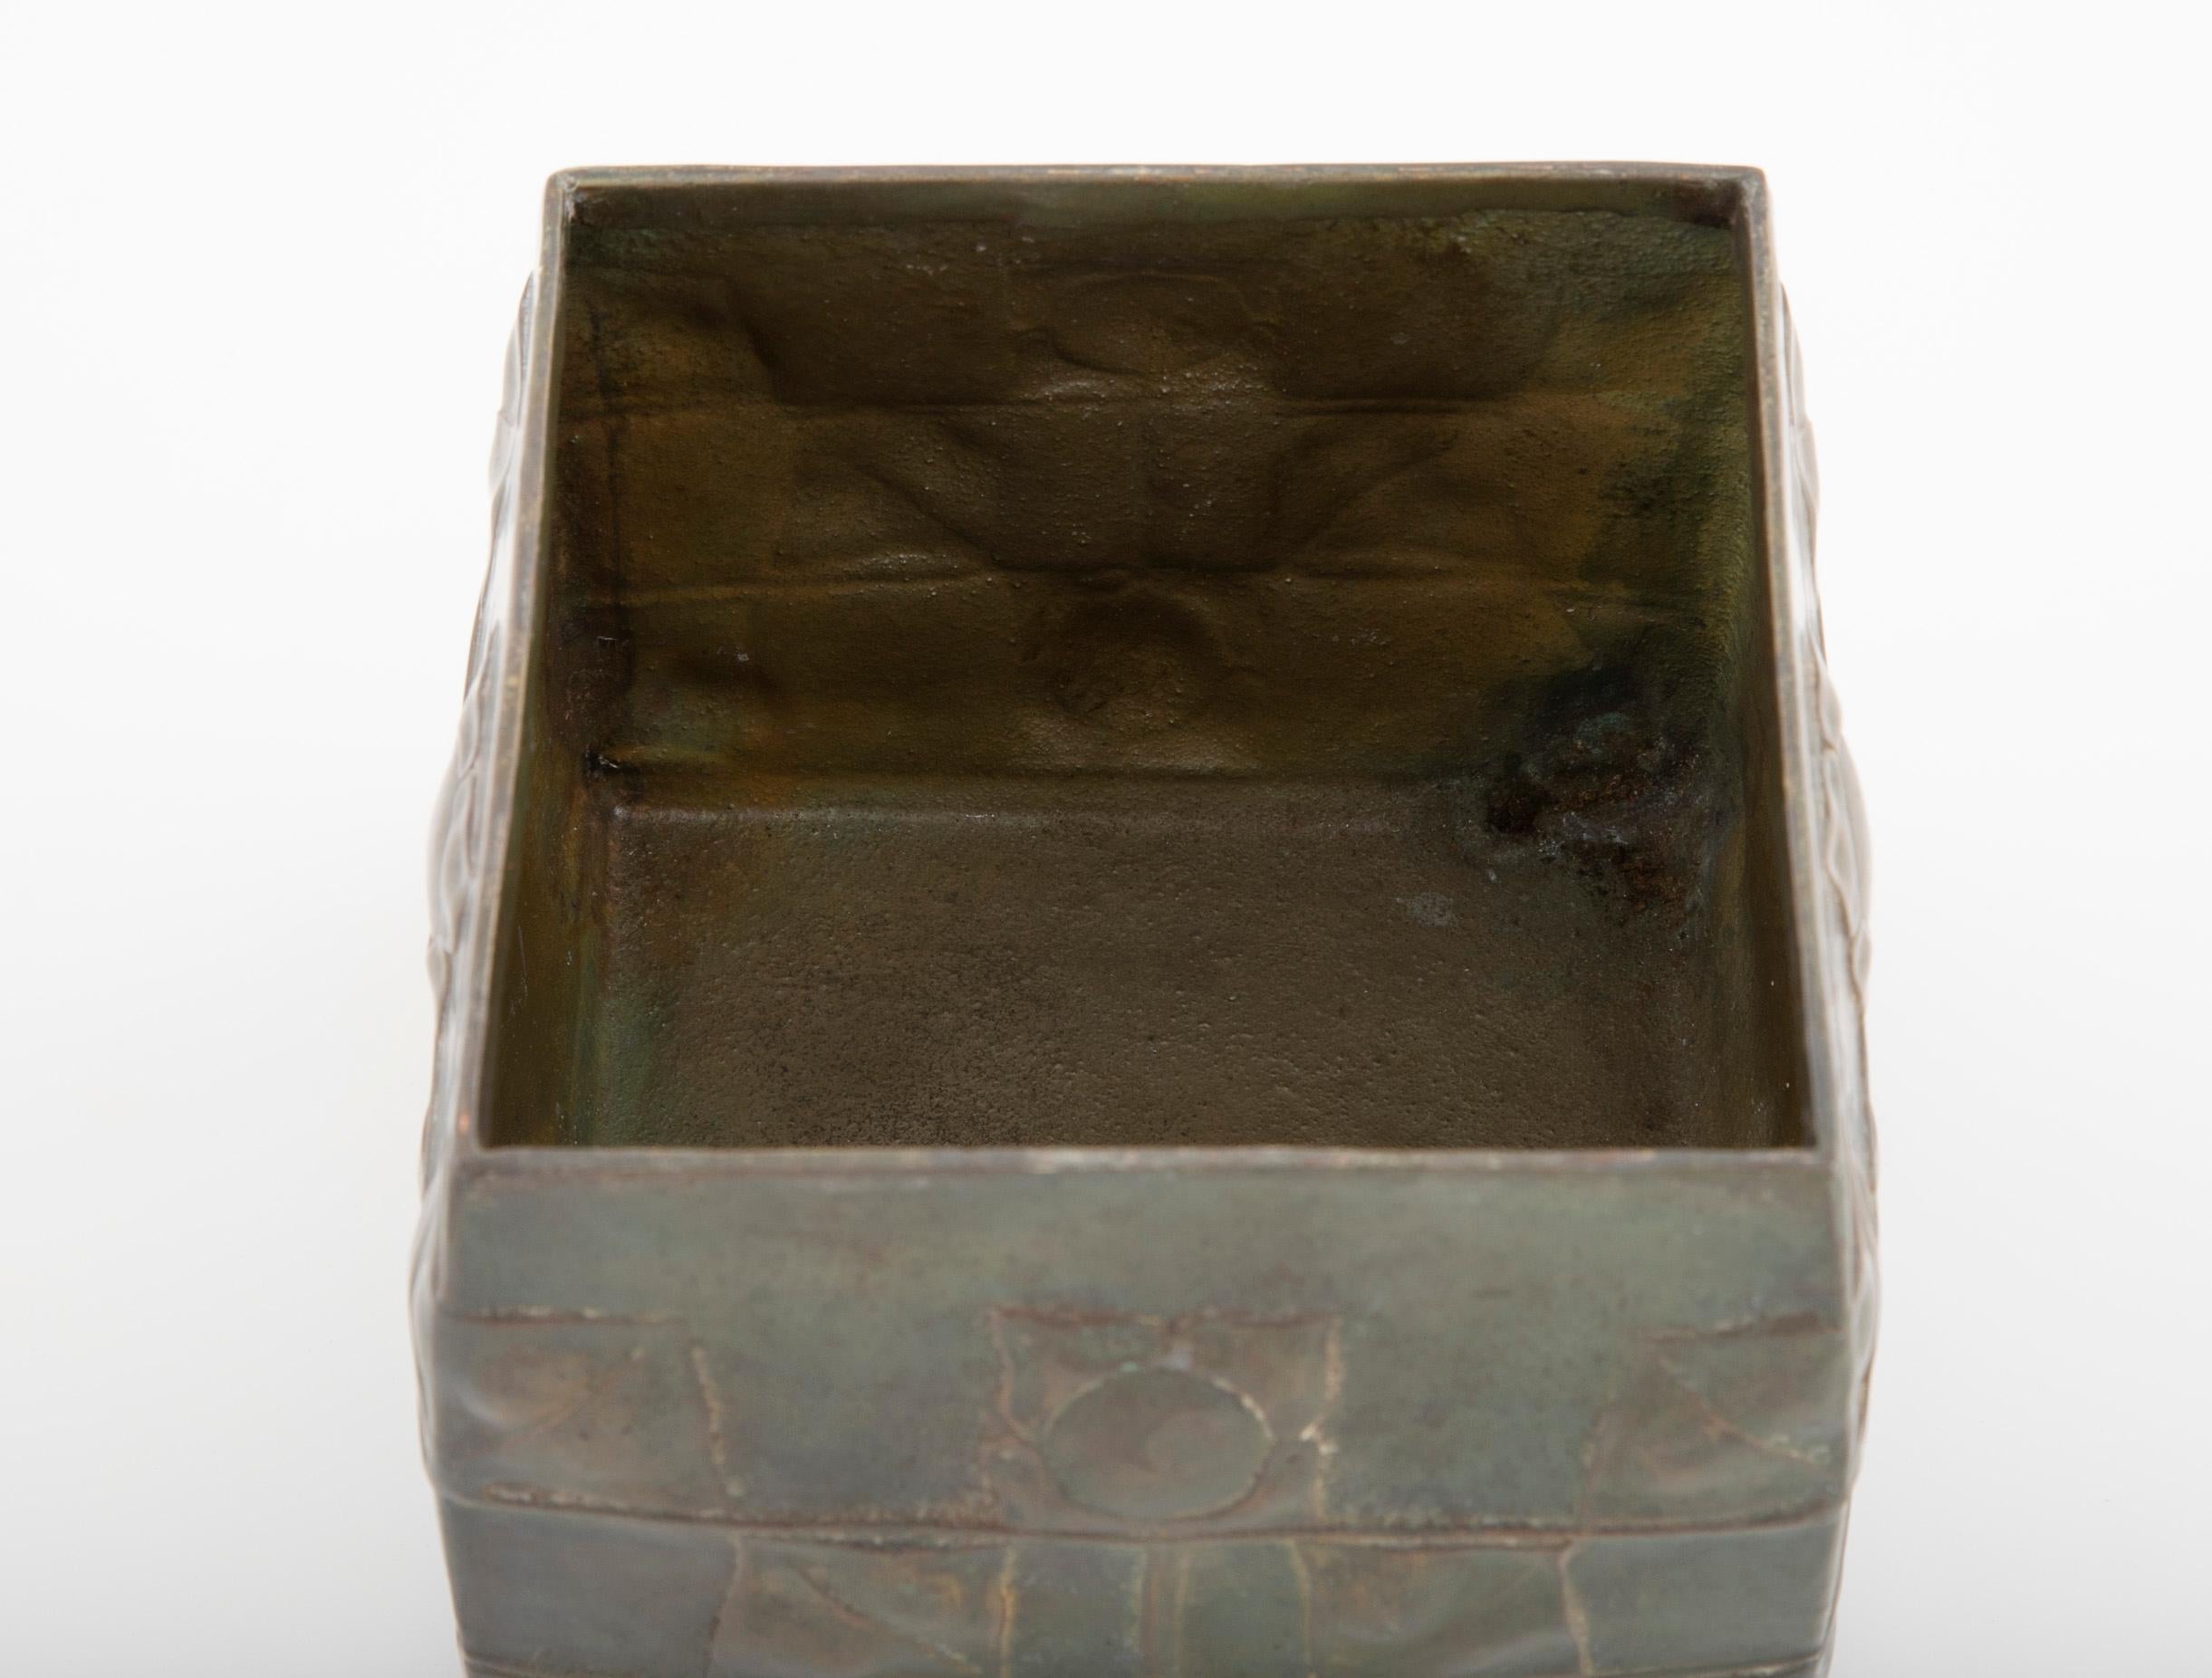 Aesthetic Movement Pewter Tudric Ware Tea Caddy Designed by Archibald Knox